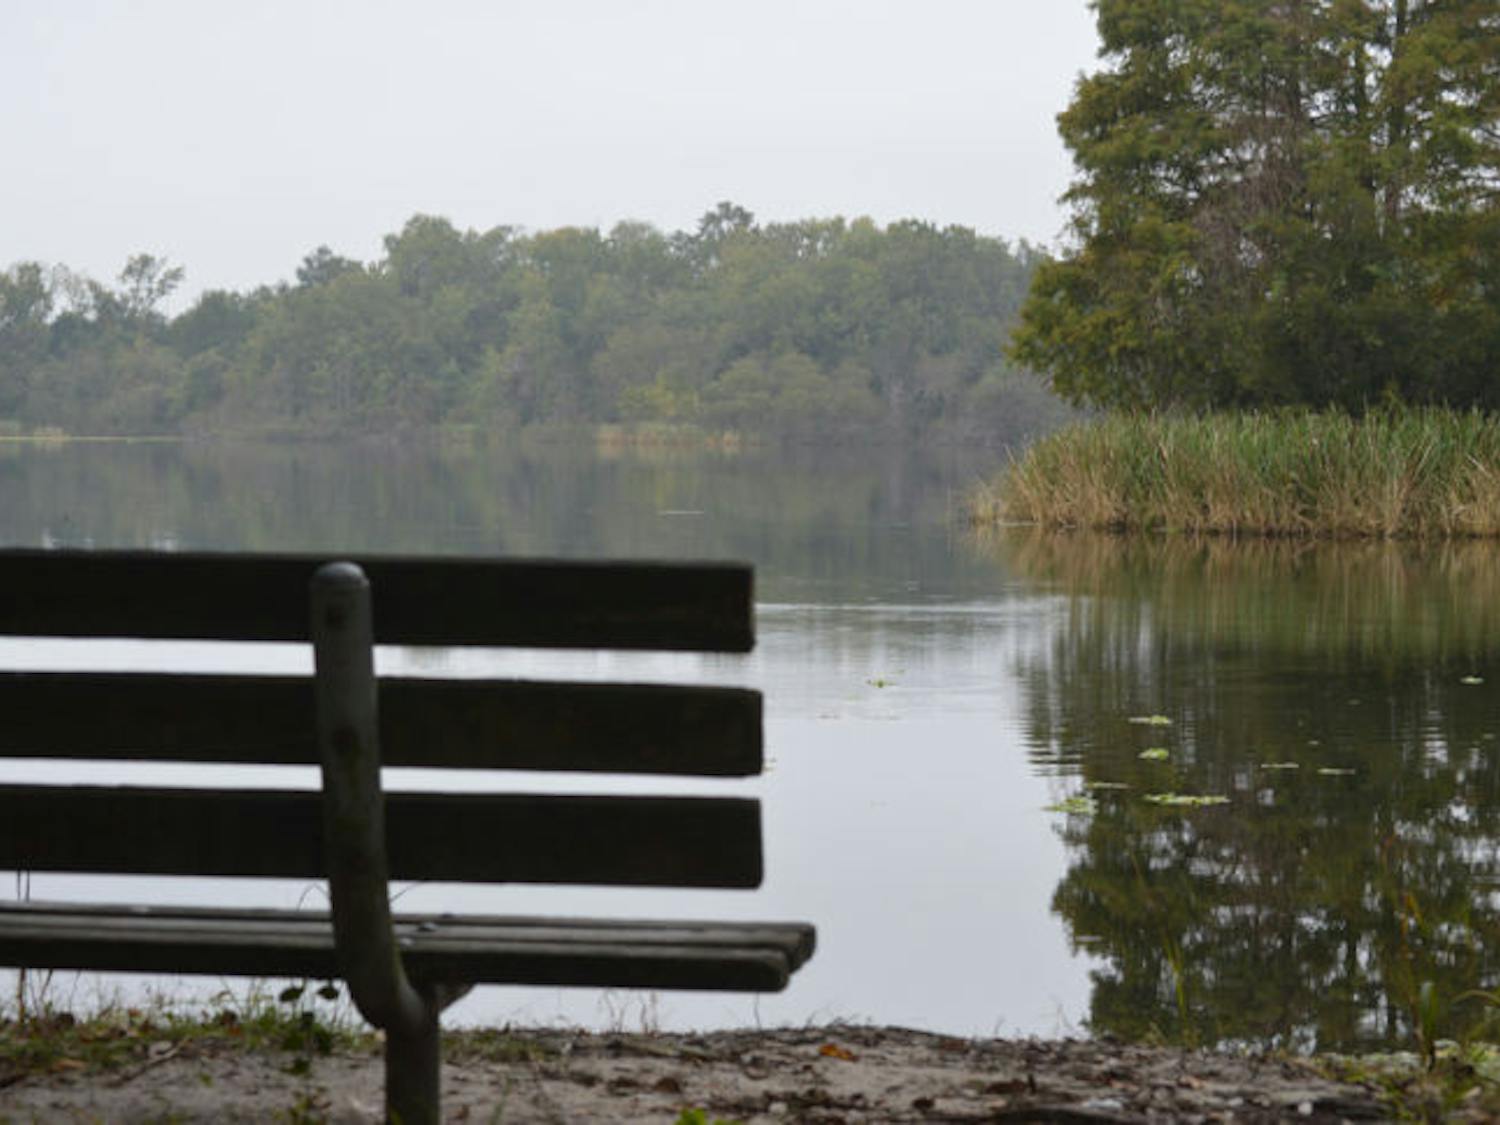 Lake Alice spans approximately 129.5 acres on UF campus.